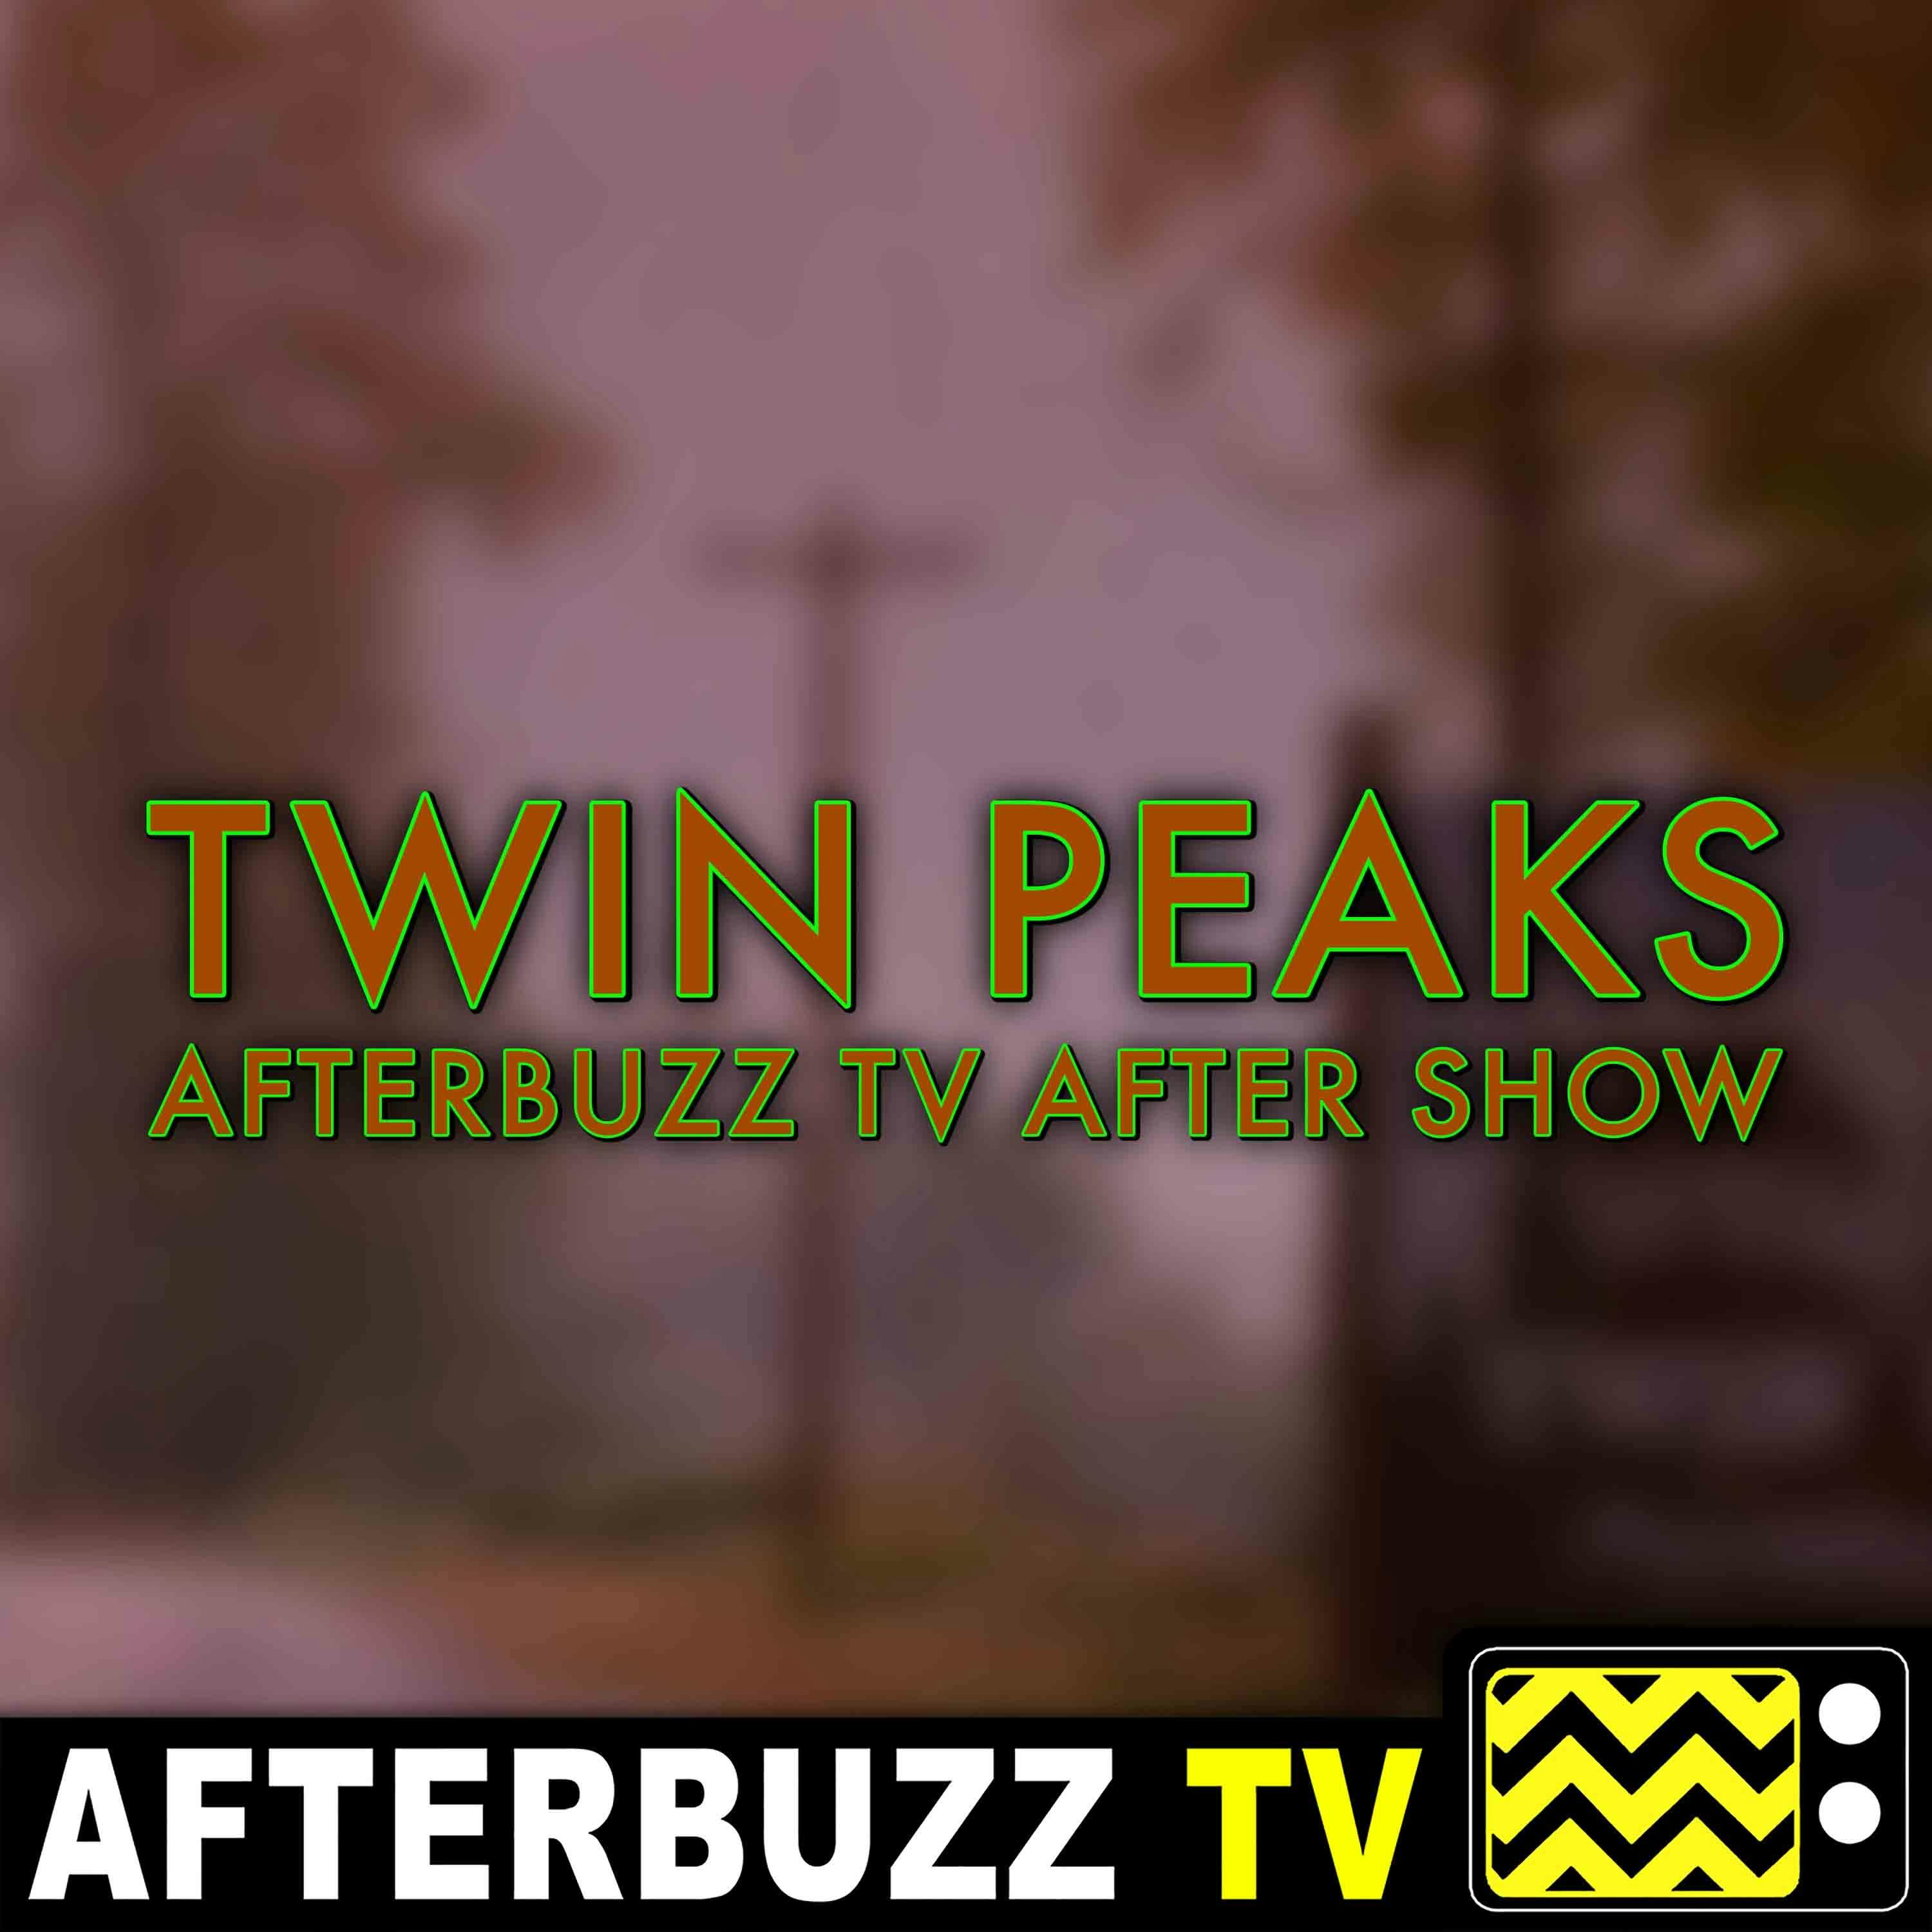 Twin Peaks S:1 | The Return: Part 16 E:16 | AfterBuzz TV AfterShow